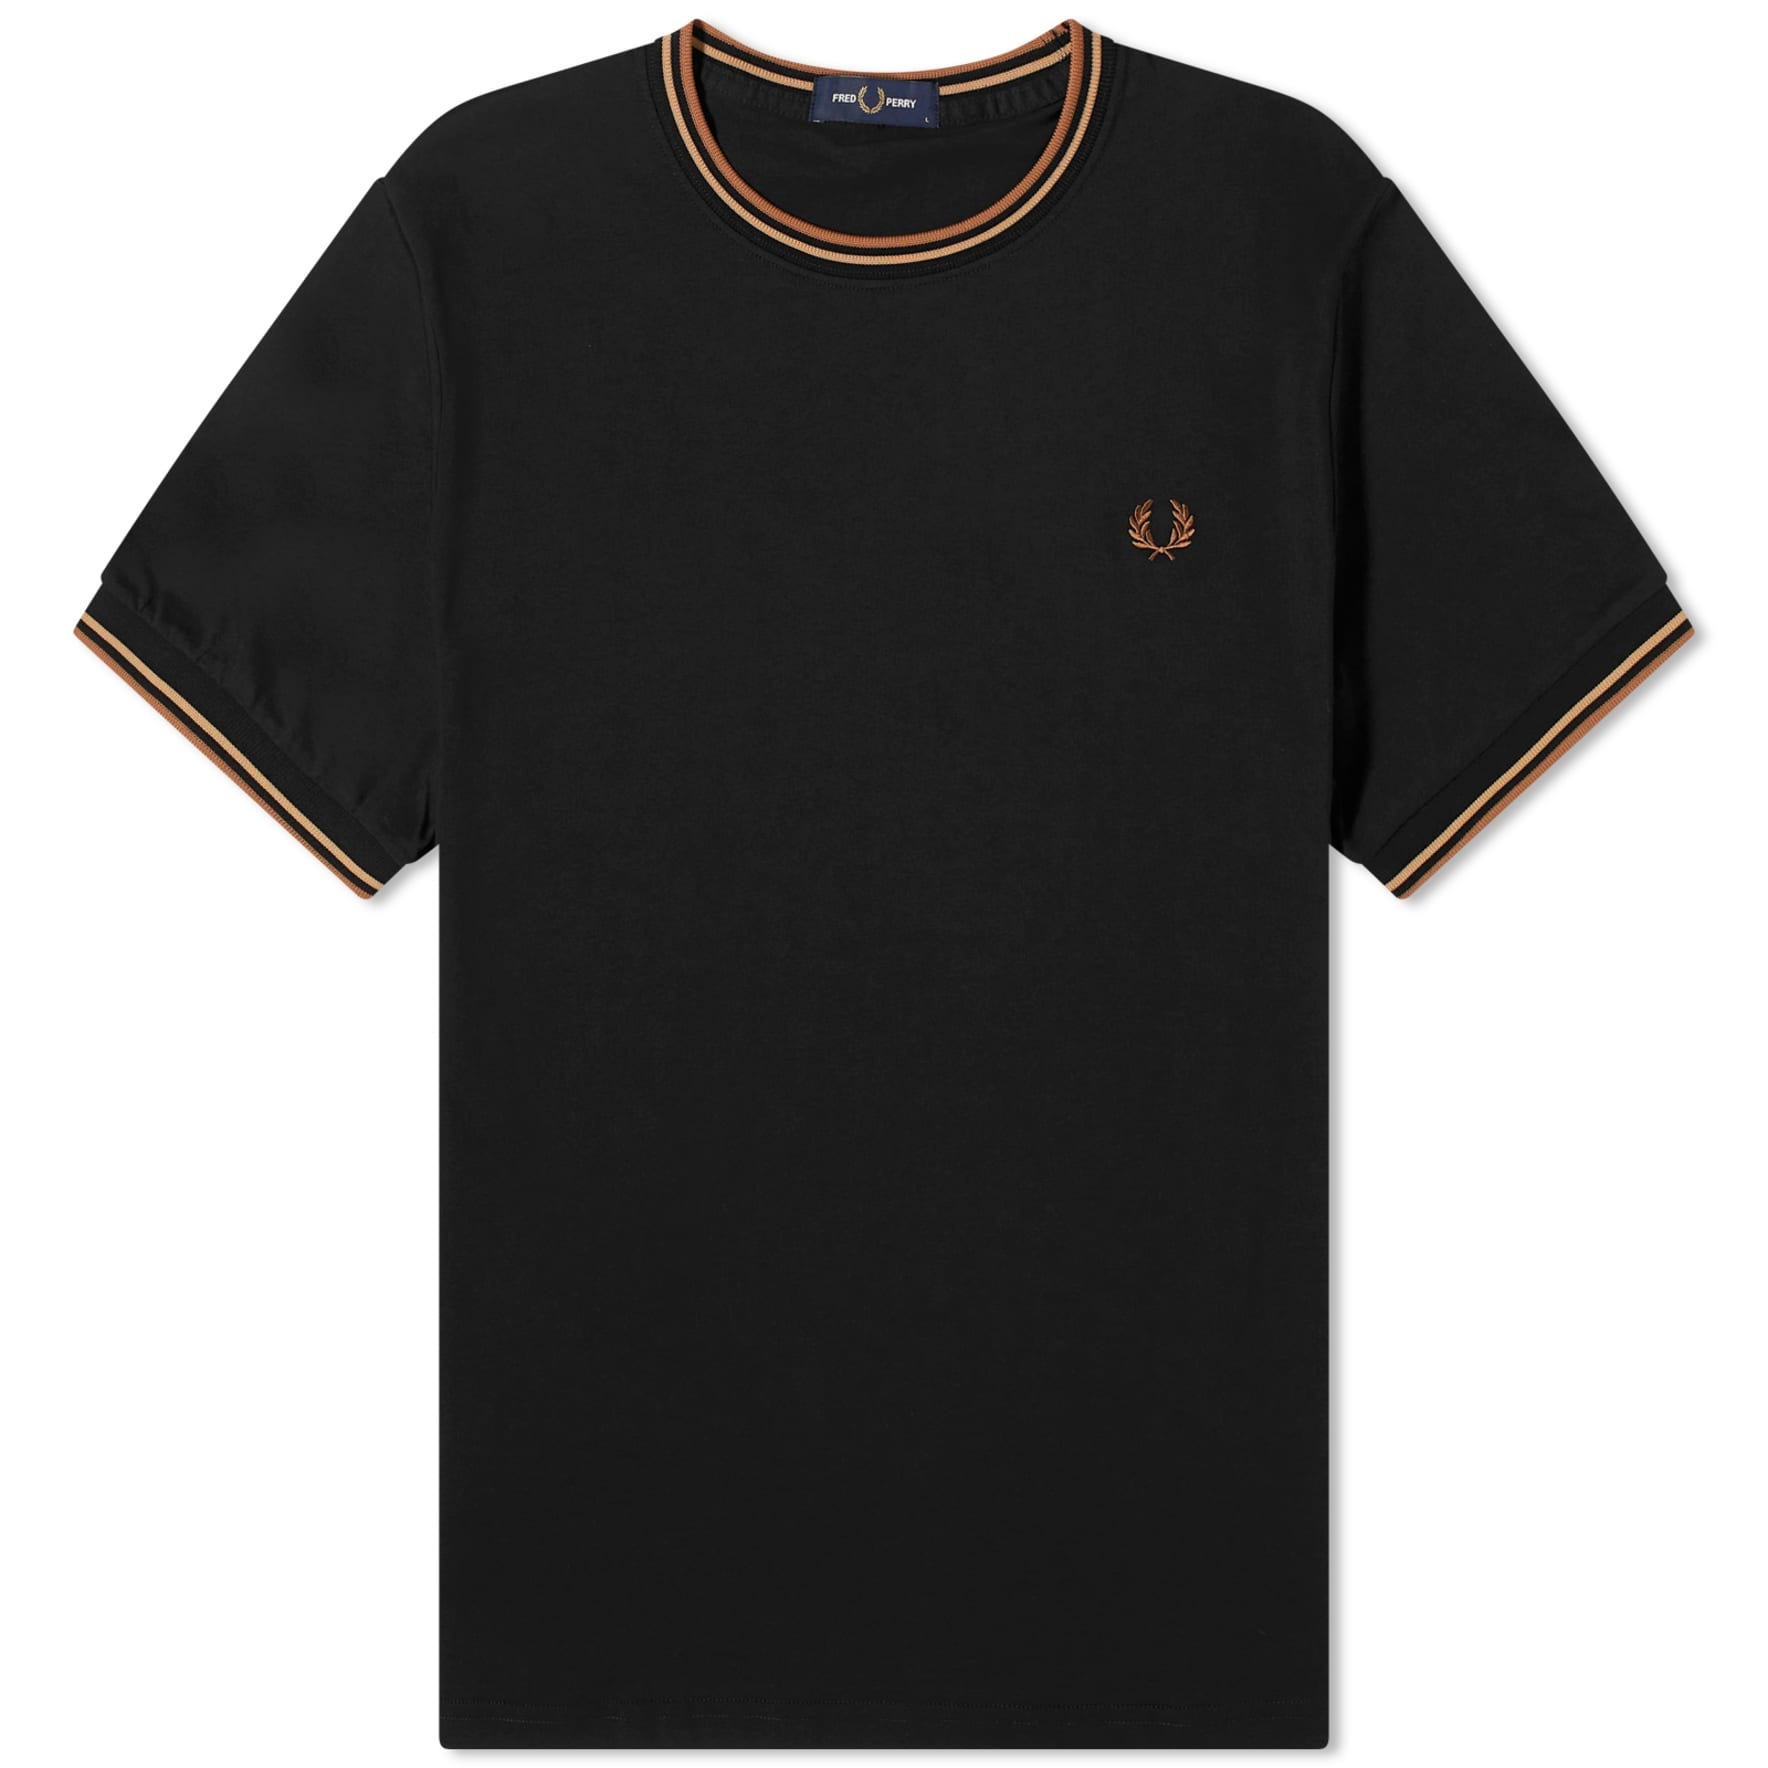 Футболка Fred Perry Twin Tipped, черный поло fred perry twin tipped цвет french navy